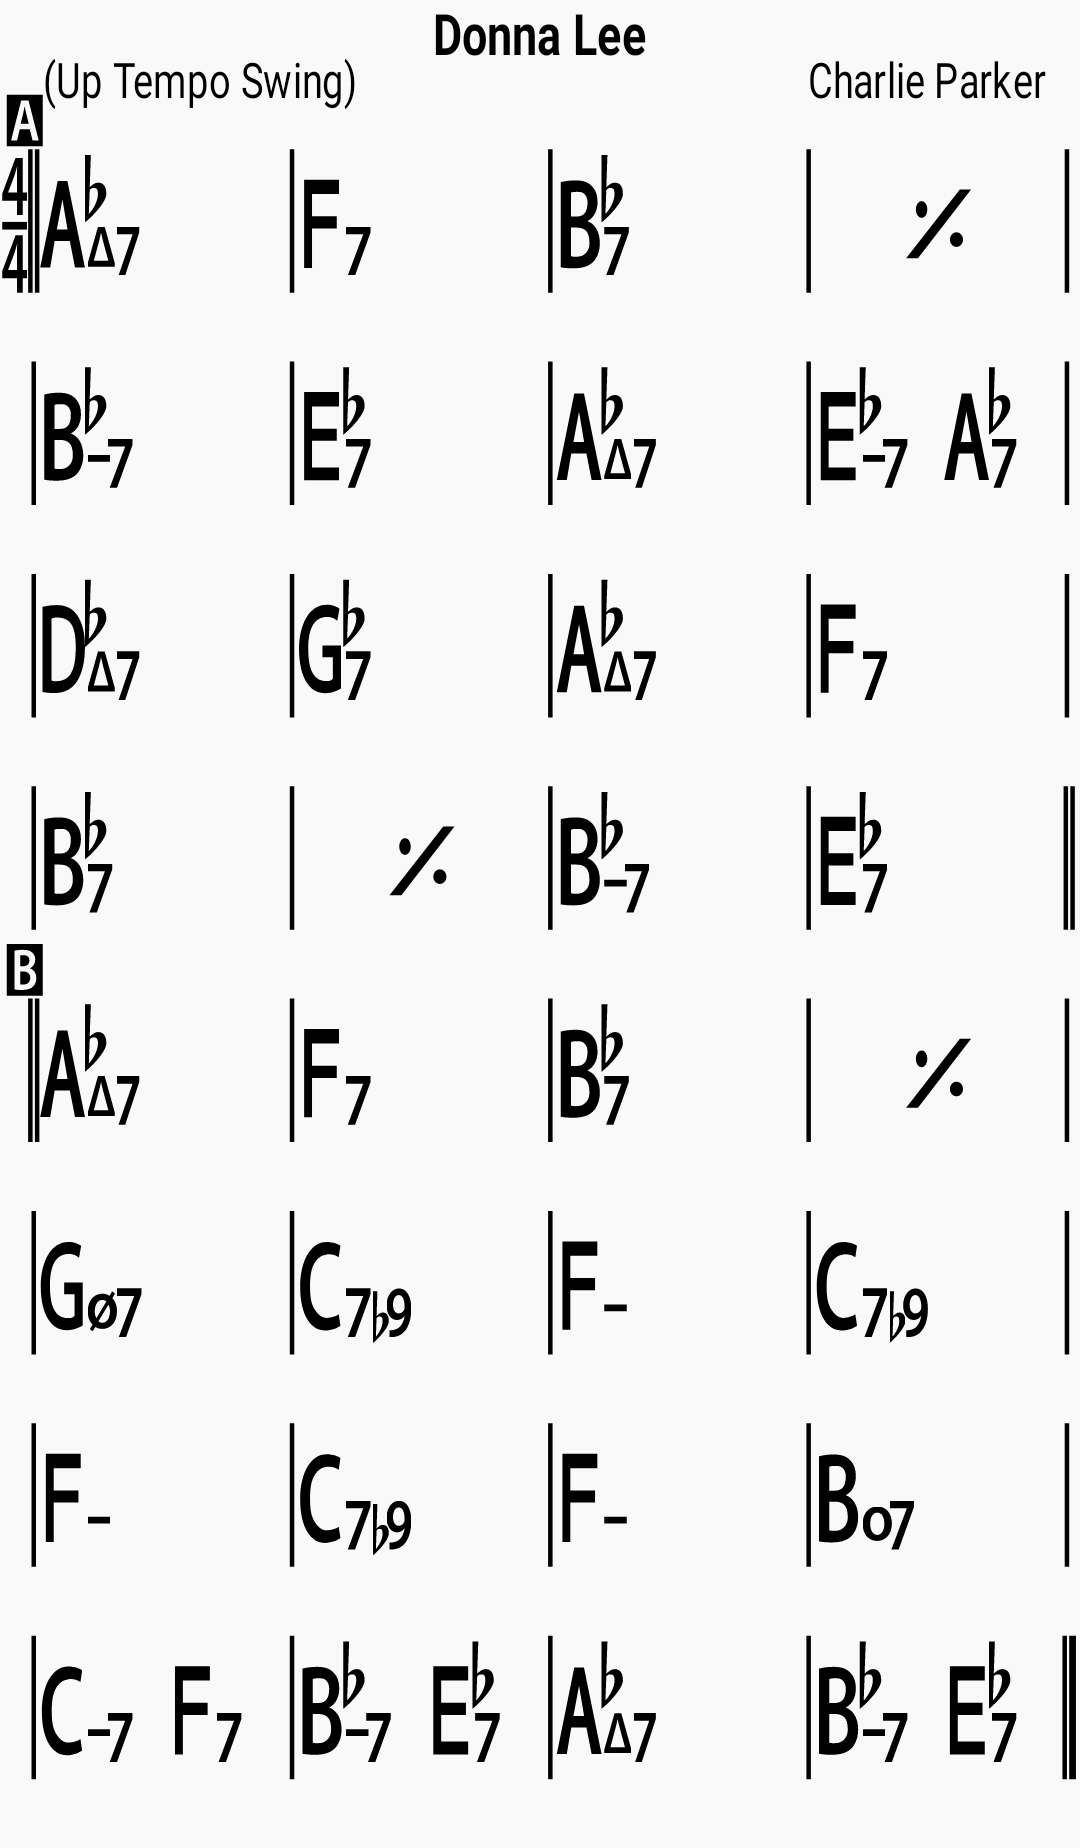 Chord chart for the jazz standard Donna Lee